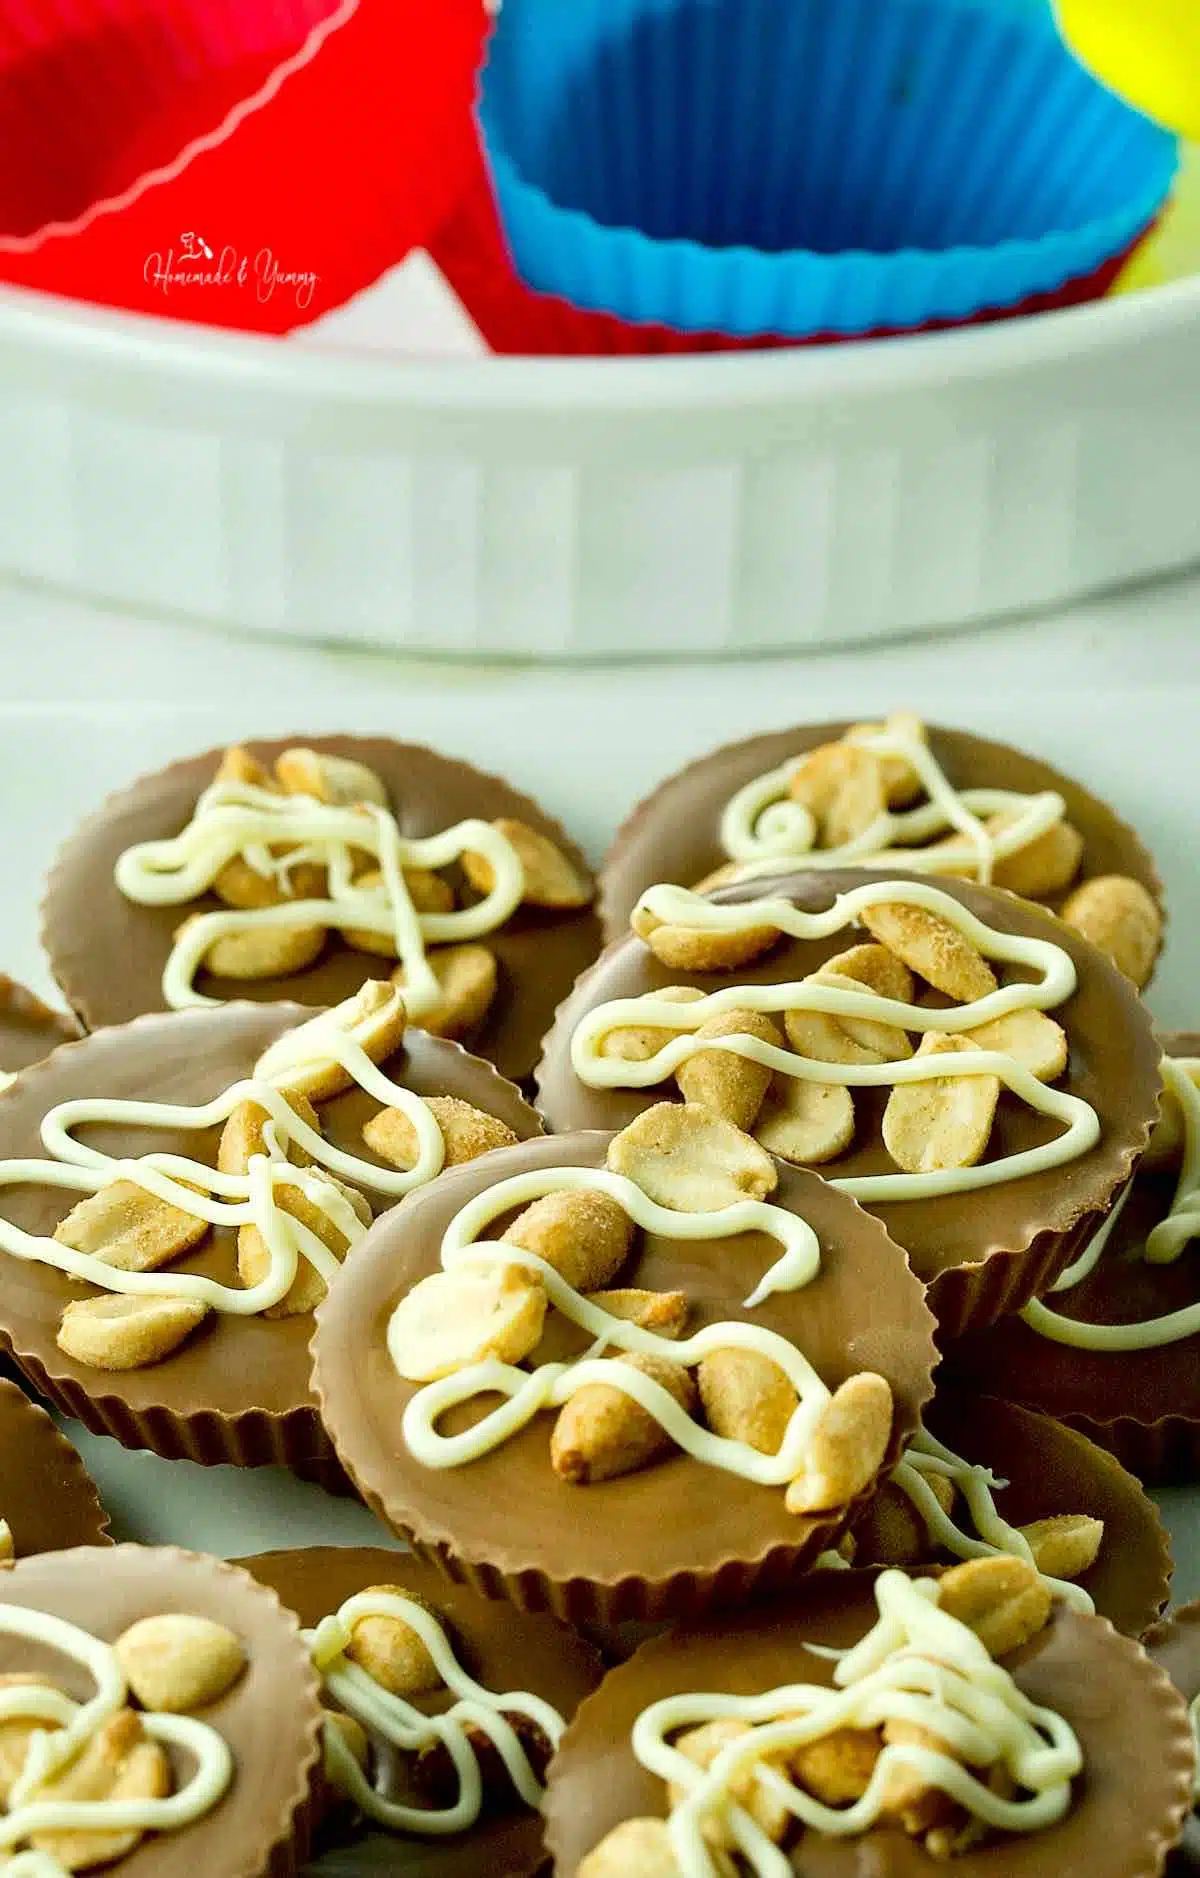 Delicious peanut butter chocolate bites ready to eat.